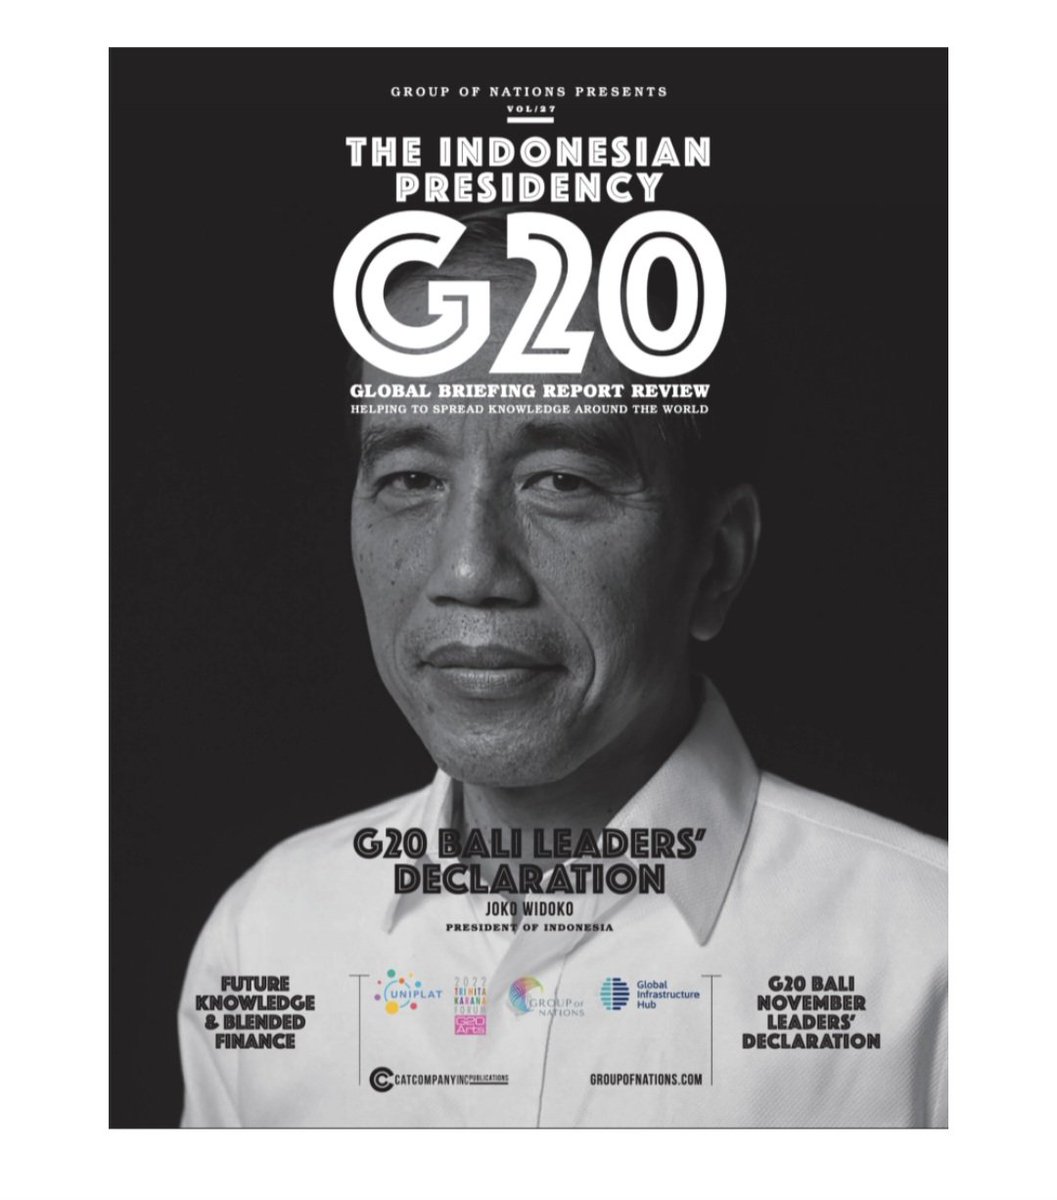 #cvcalliance

G20 Indonesia Global Briefing Report is now available.

CVC contributes to solving social issues around the world with the Group of nations.

groupofnations.com/publications/g…